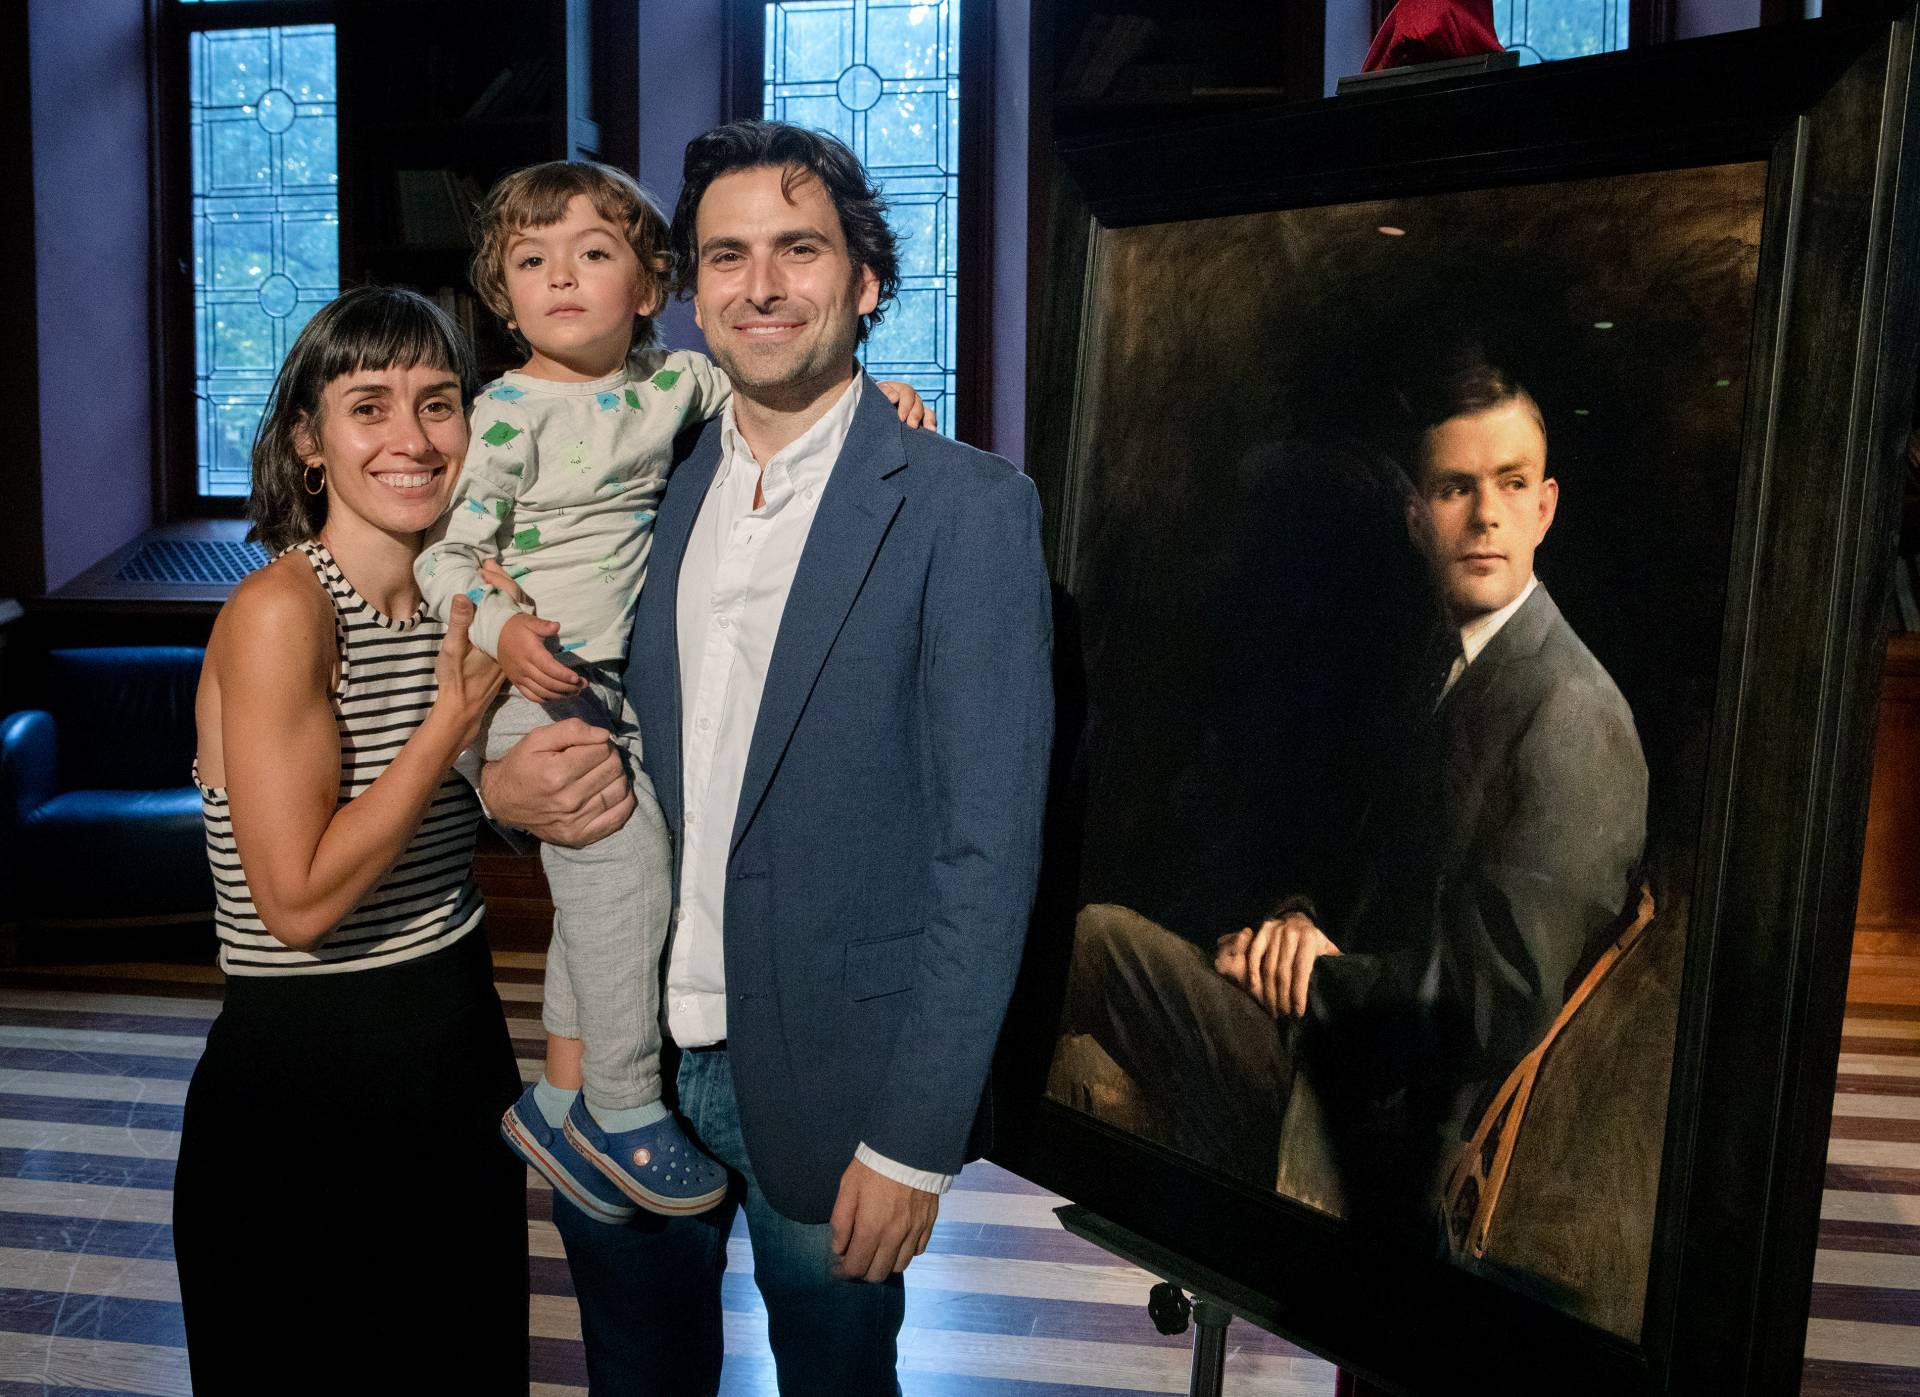 The artist and his family pose next to the portrait of Alan Turing